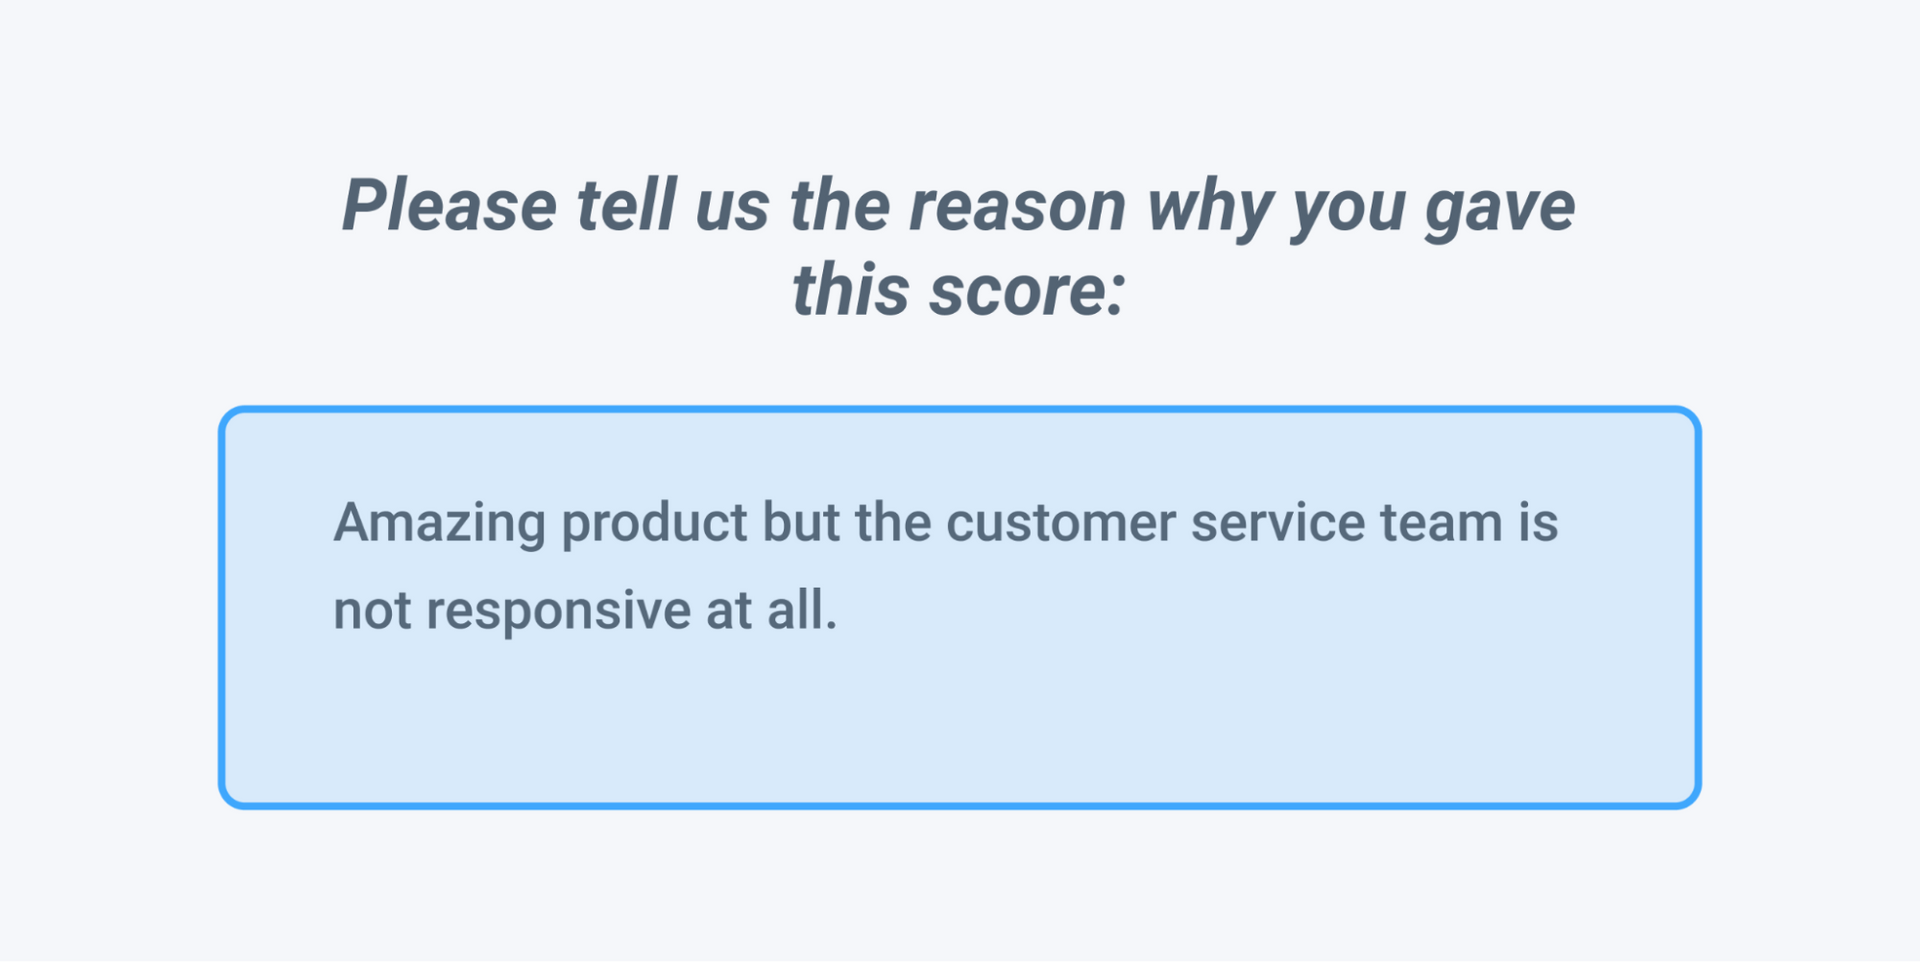 An example of an open-ended question that follows on from a close-ended question. This question asks users: 'Please tell us the reason why you gave this score' and provides a text field below, where respondents can give their honest opinions.